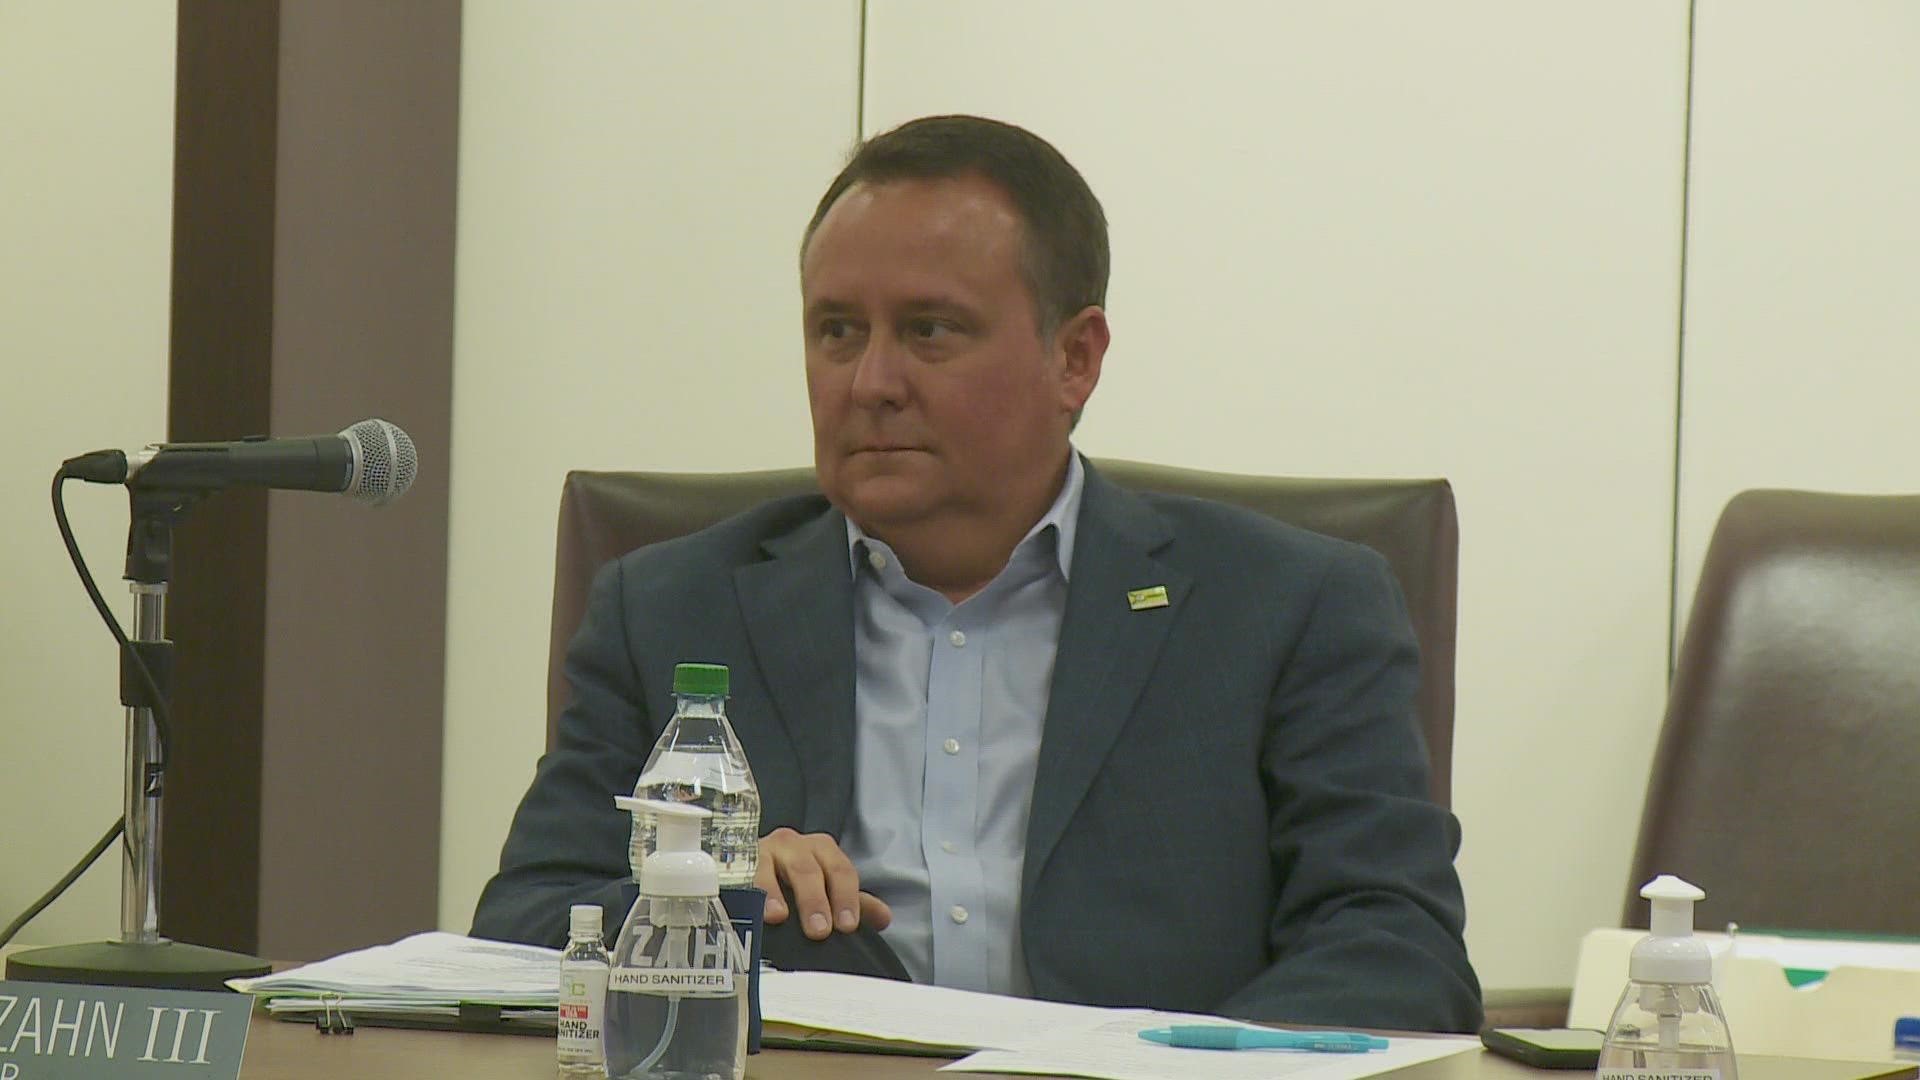 The Kenner City Council approved a resolution expressing a vote of no confidence in Mayor Zahn's administration.